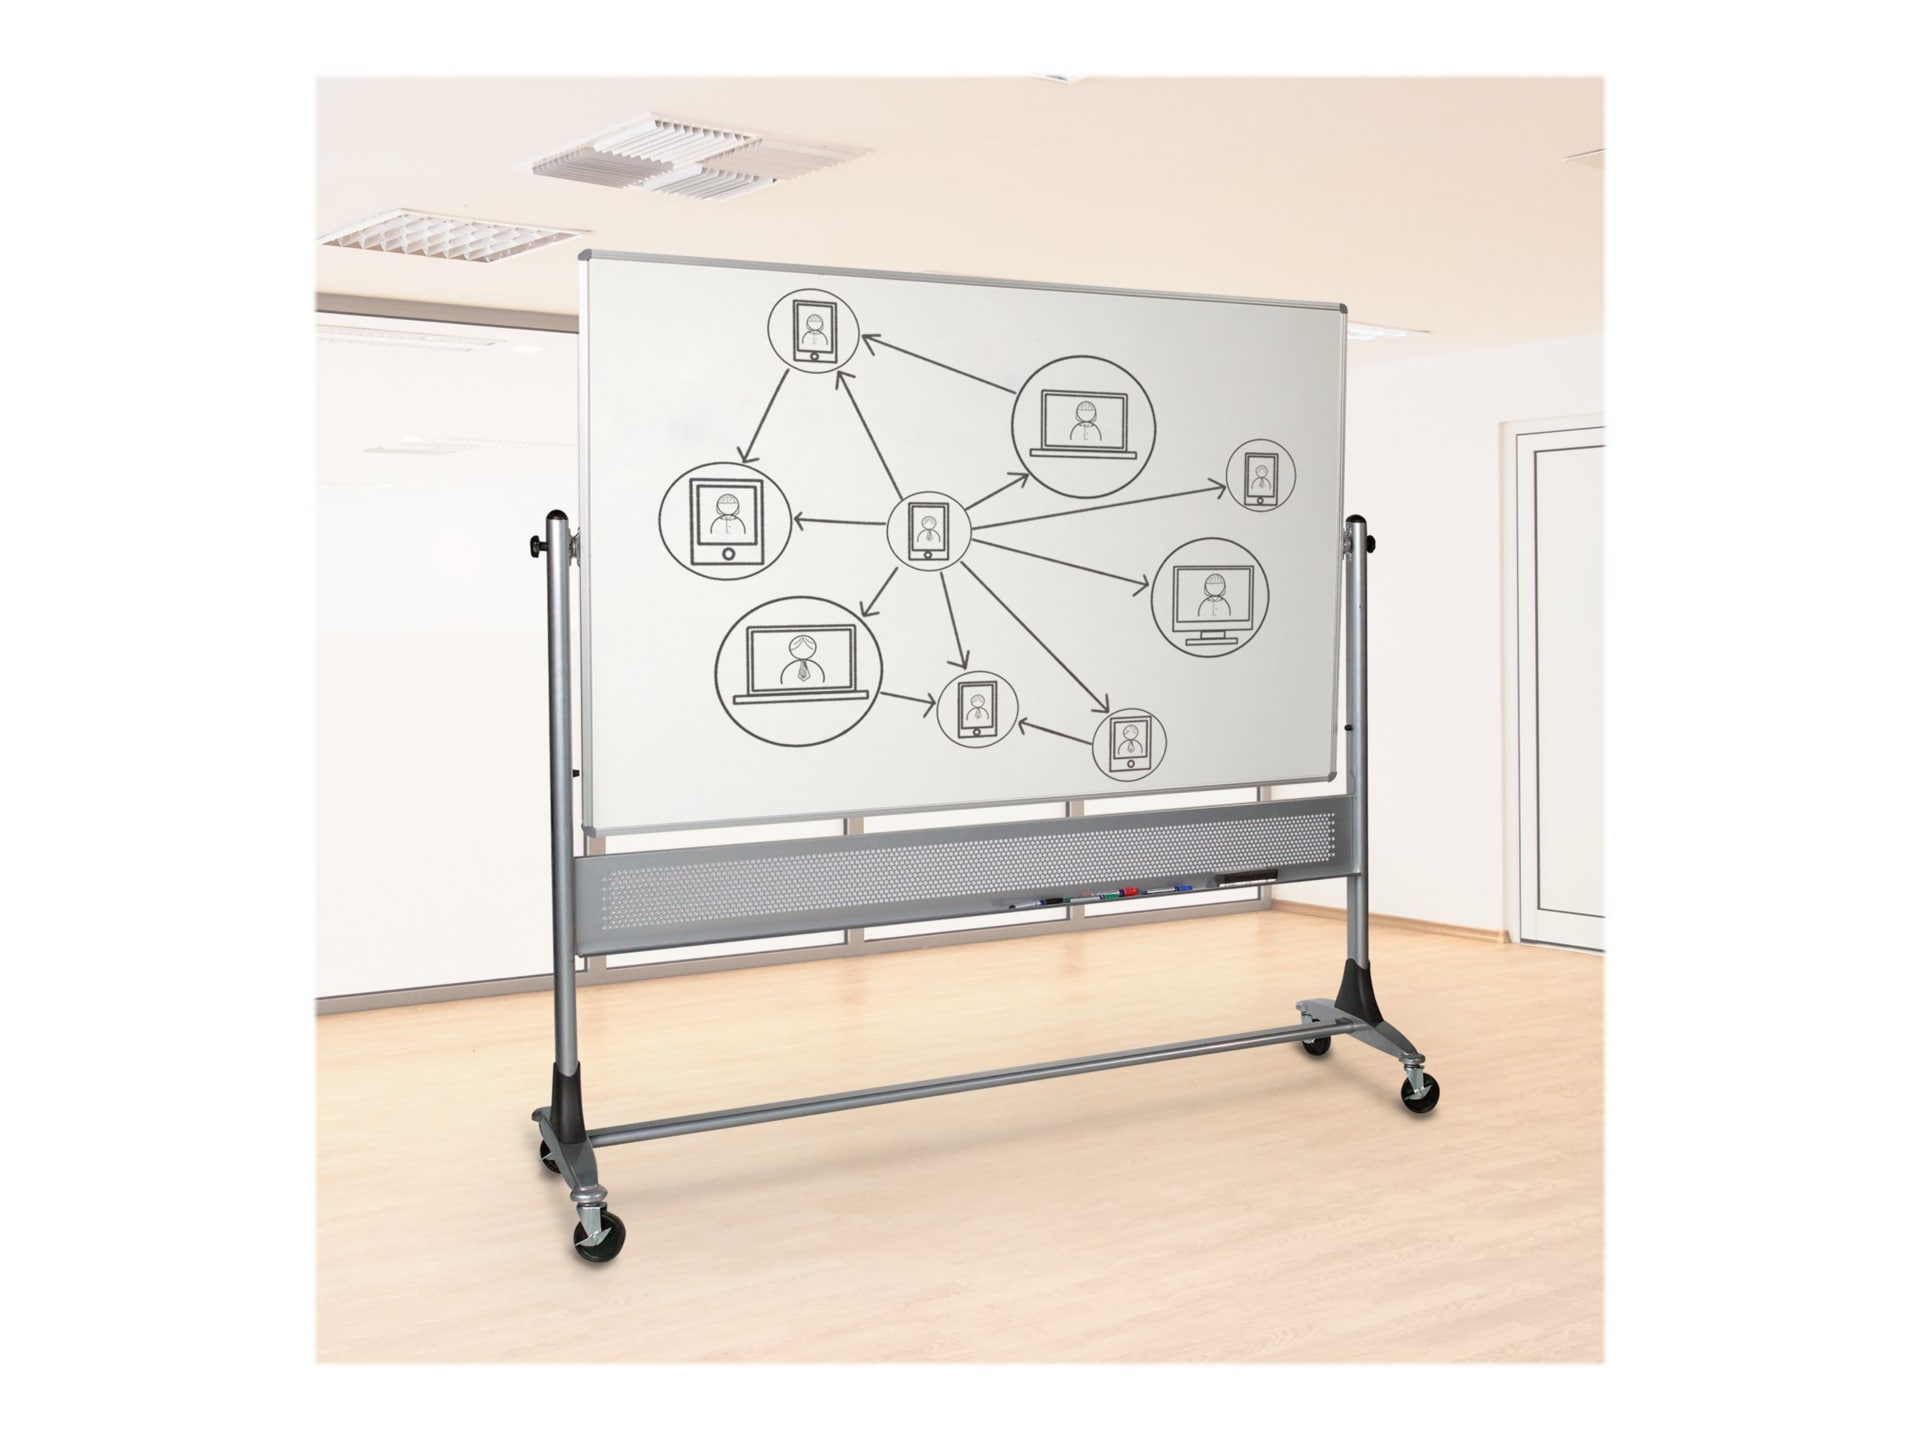 Best-Rite Platinum whiteboard - 72 in x 48 in - double-sided